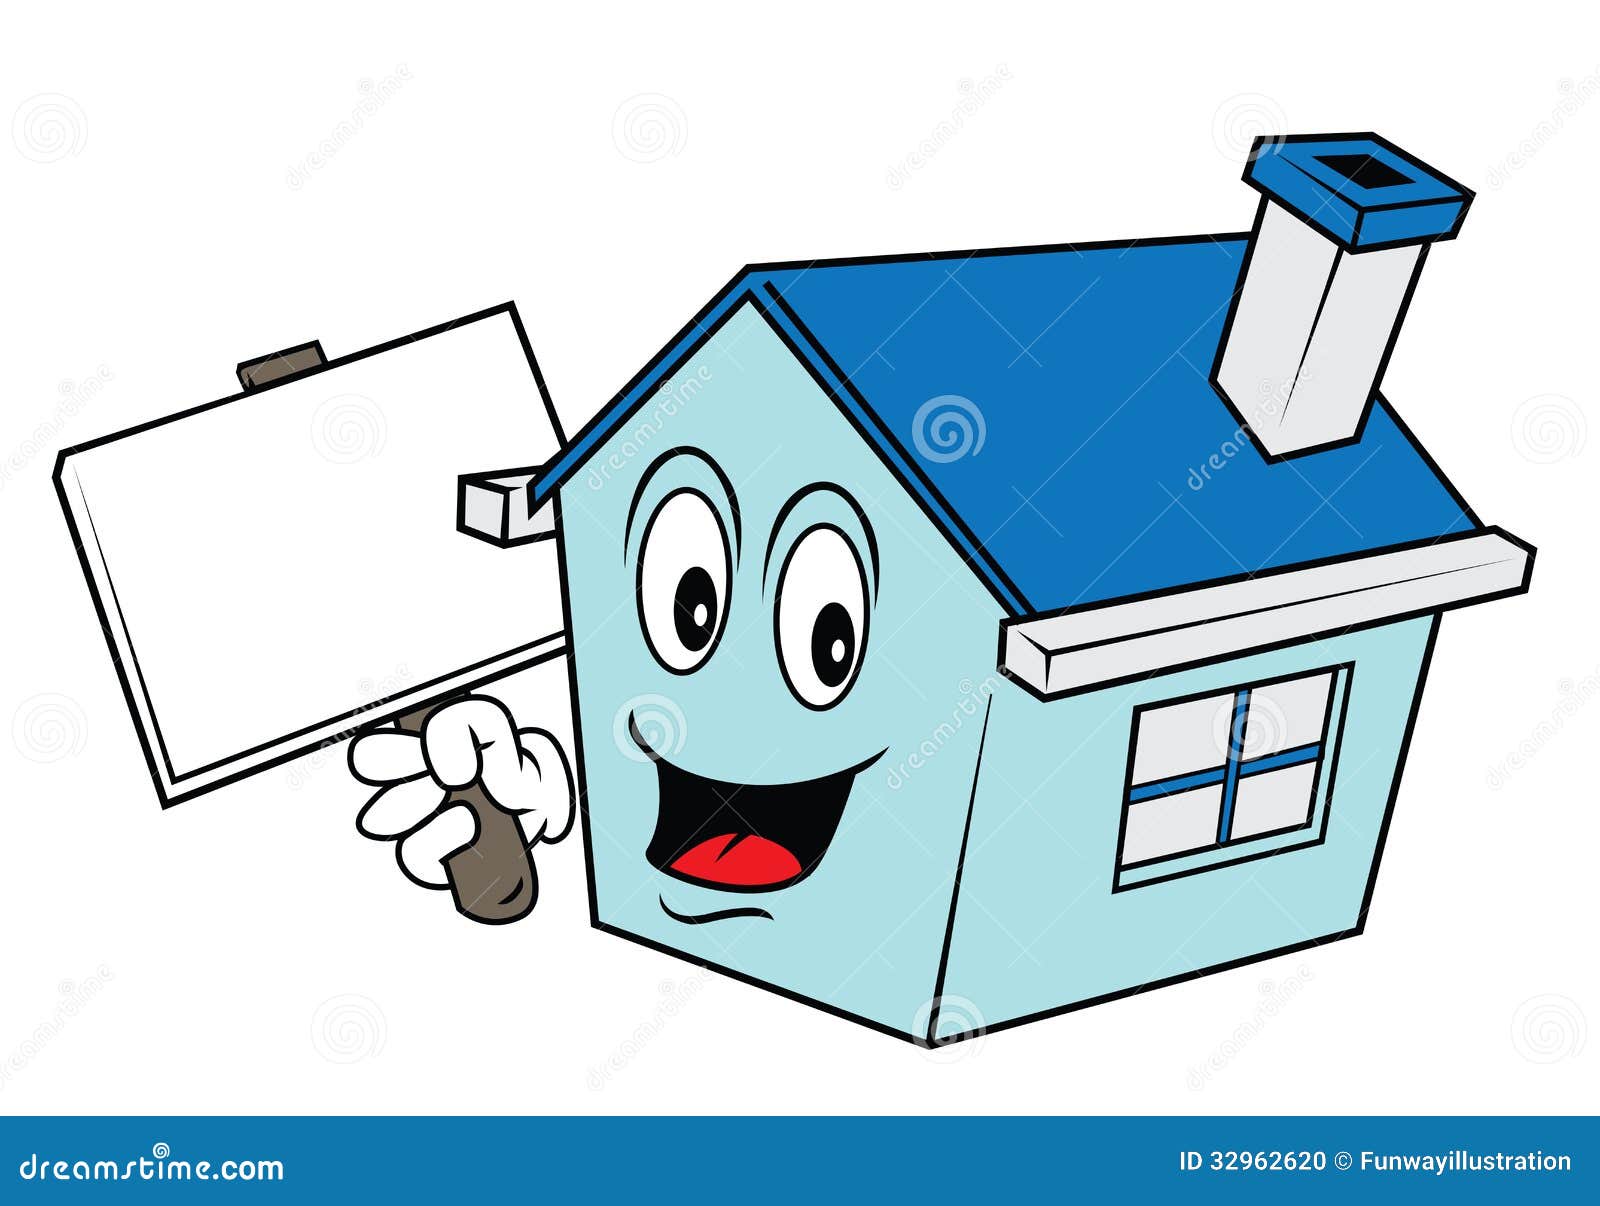 funny house clipart - photo #50